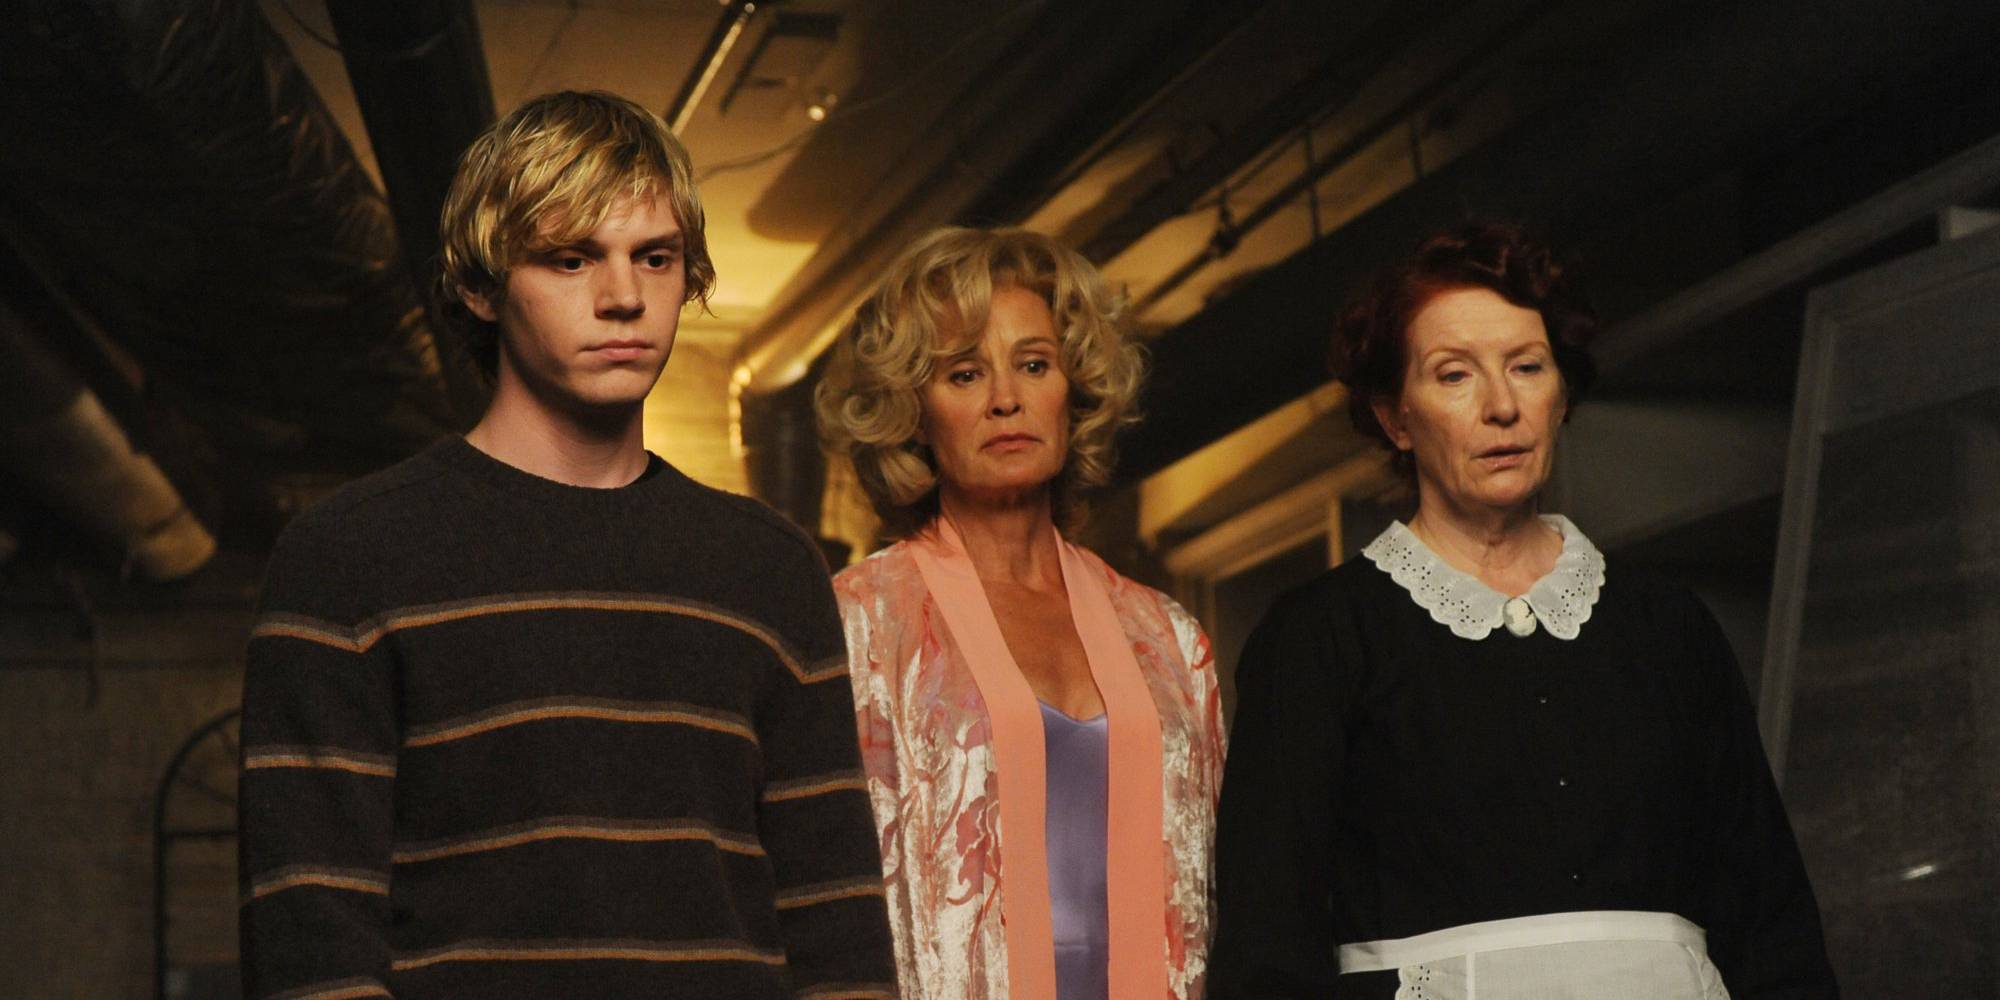  American Horror Story: Tate, Constance und Moira.